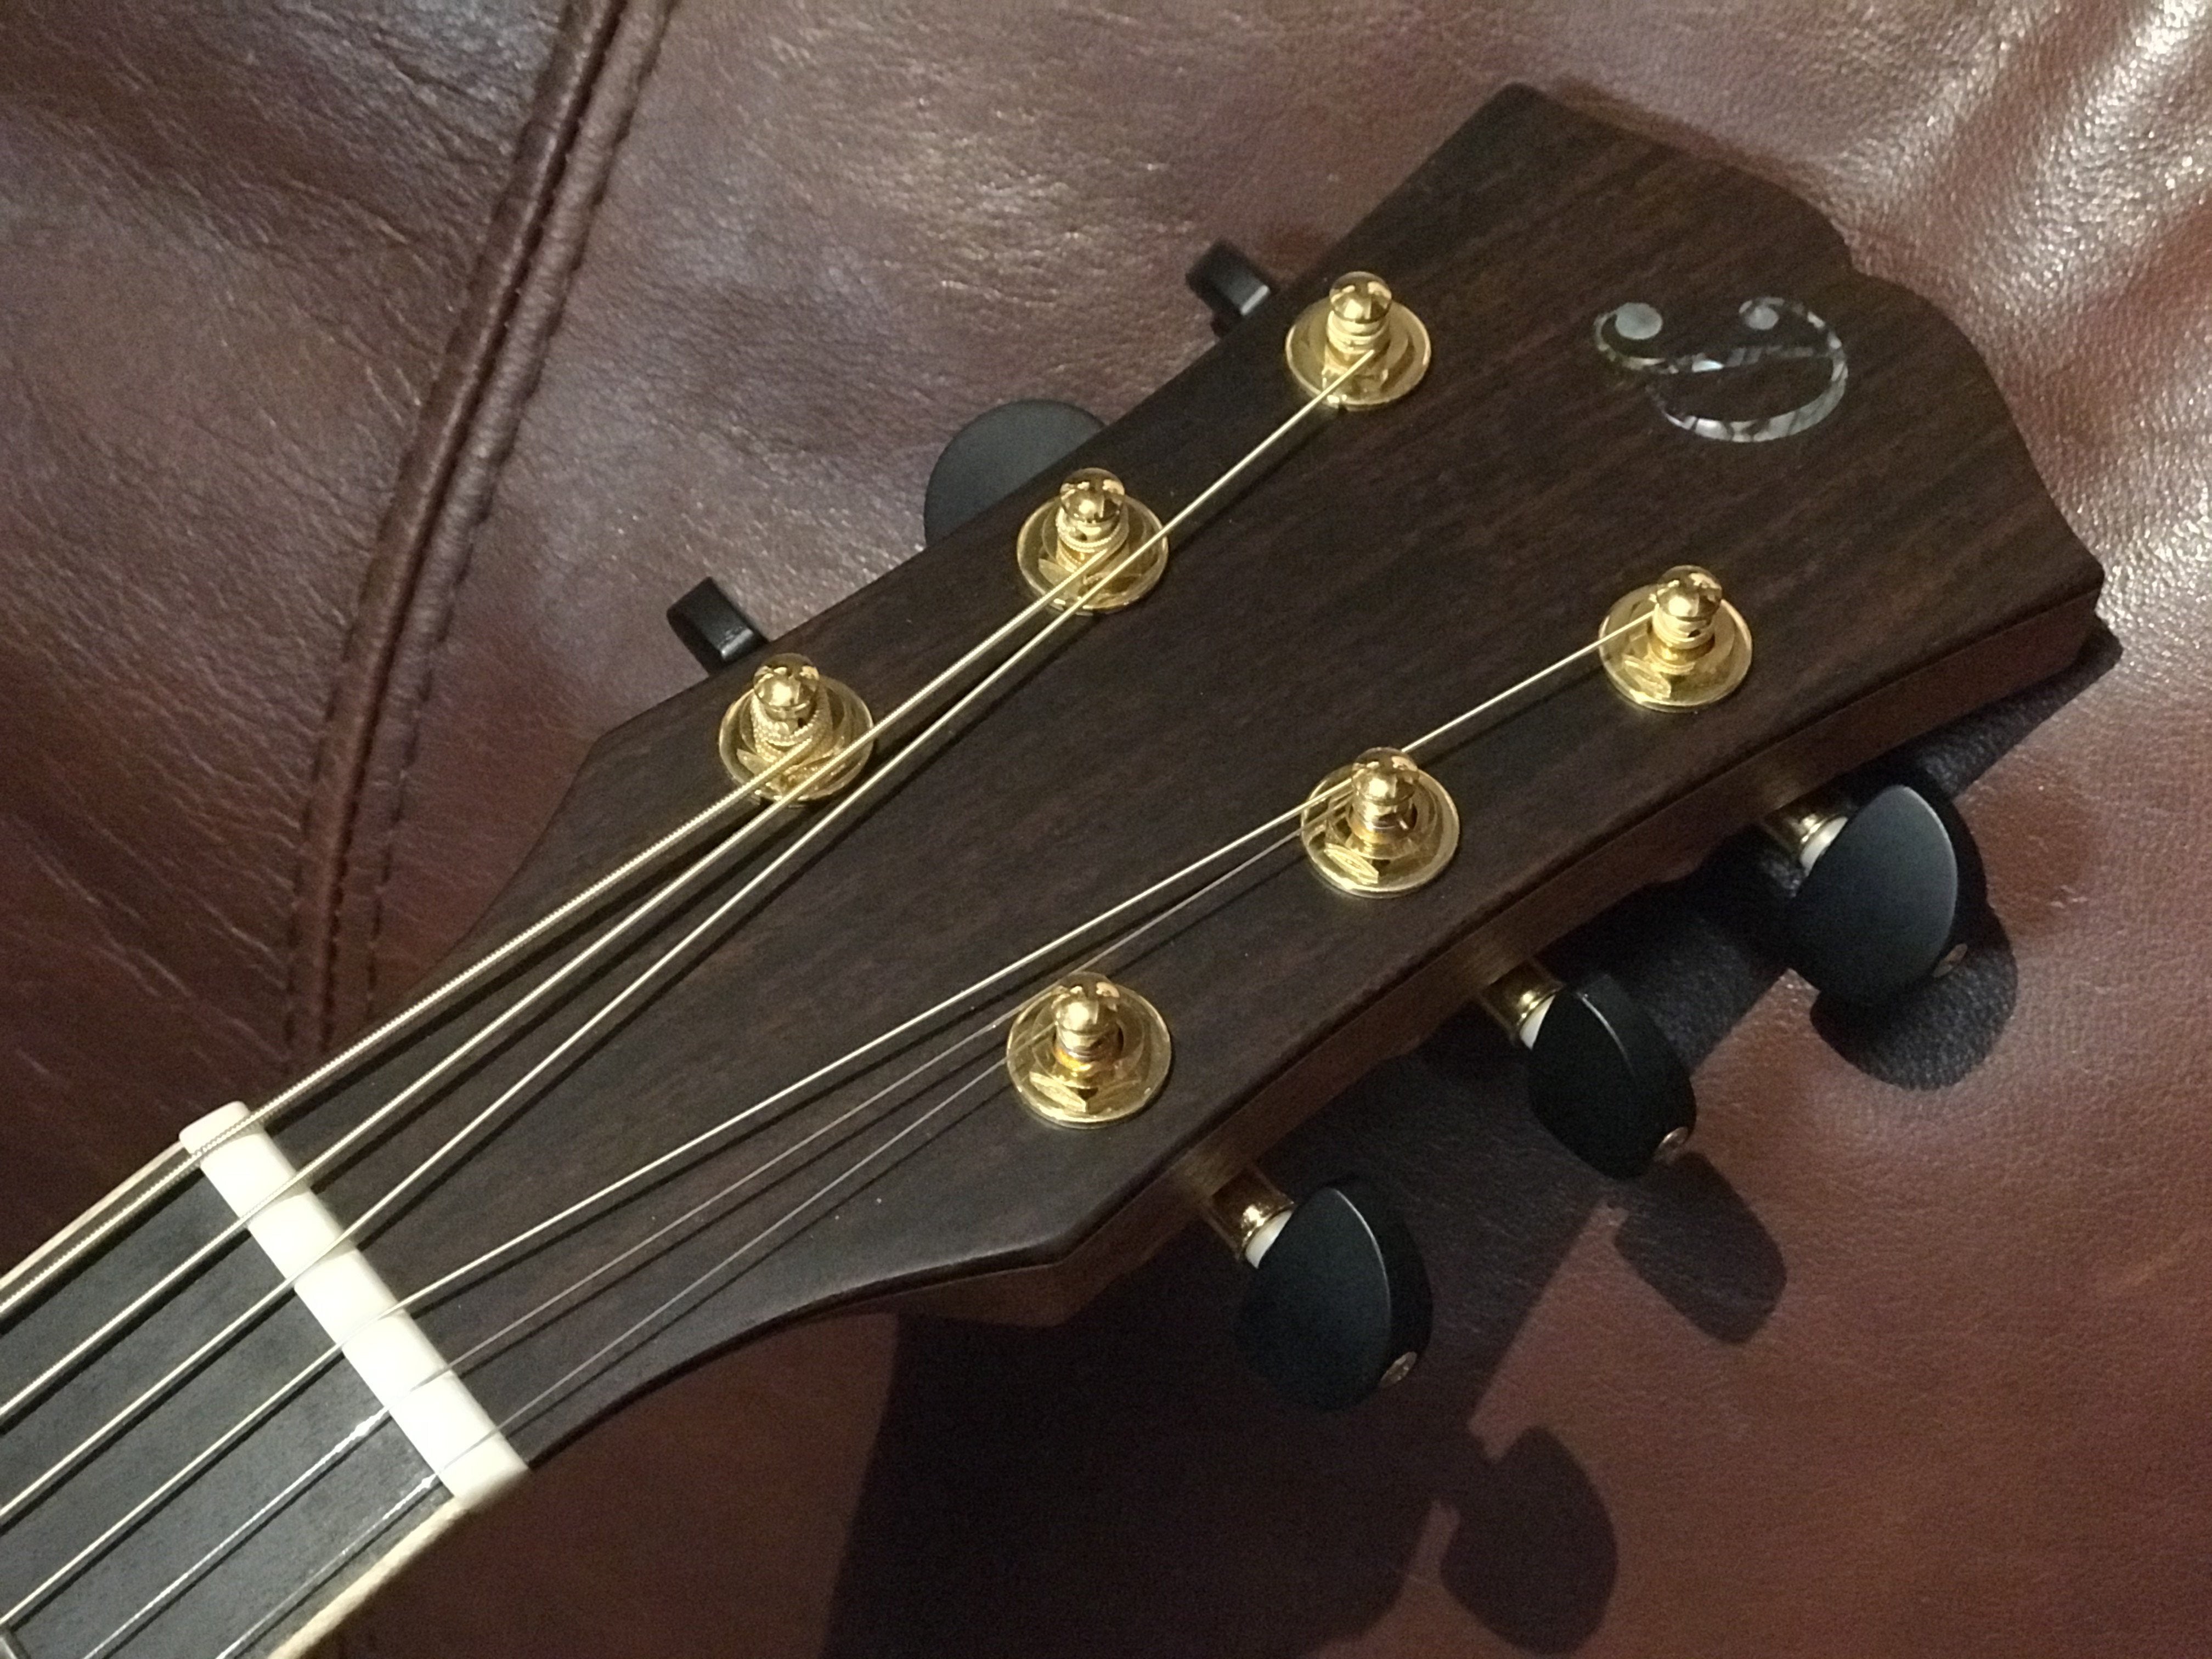 Dowina Rosewood (Ceres) GAC DS, Acoustic Guitar for sale at Richards Guitars.